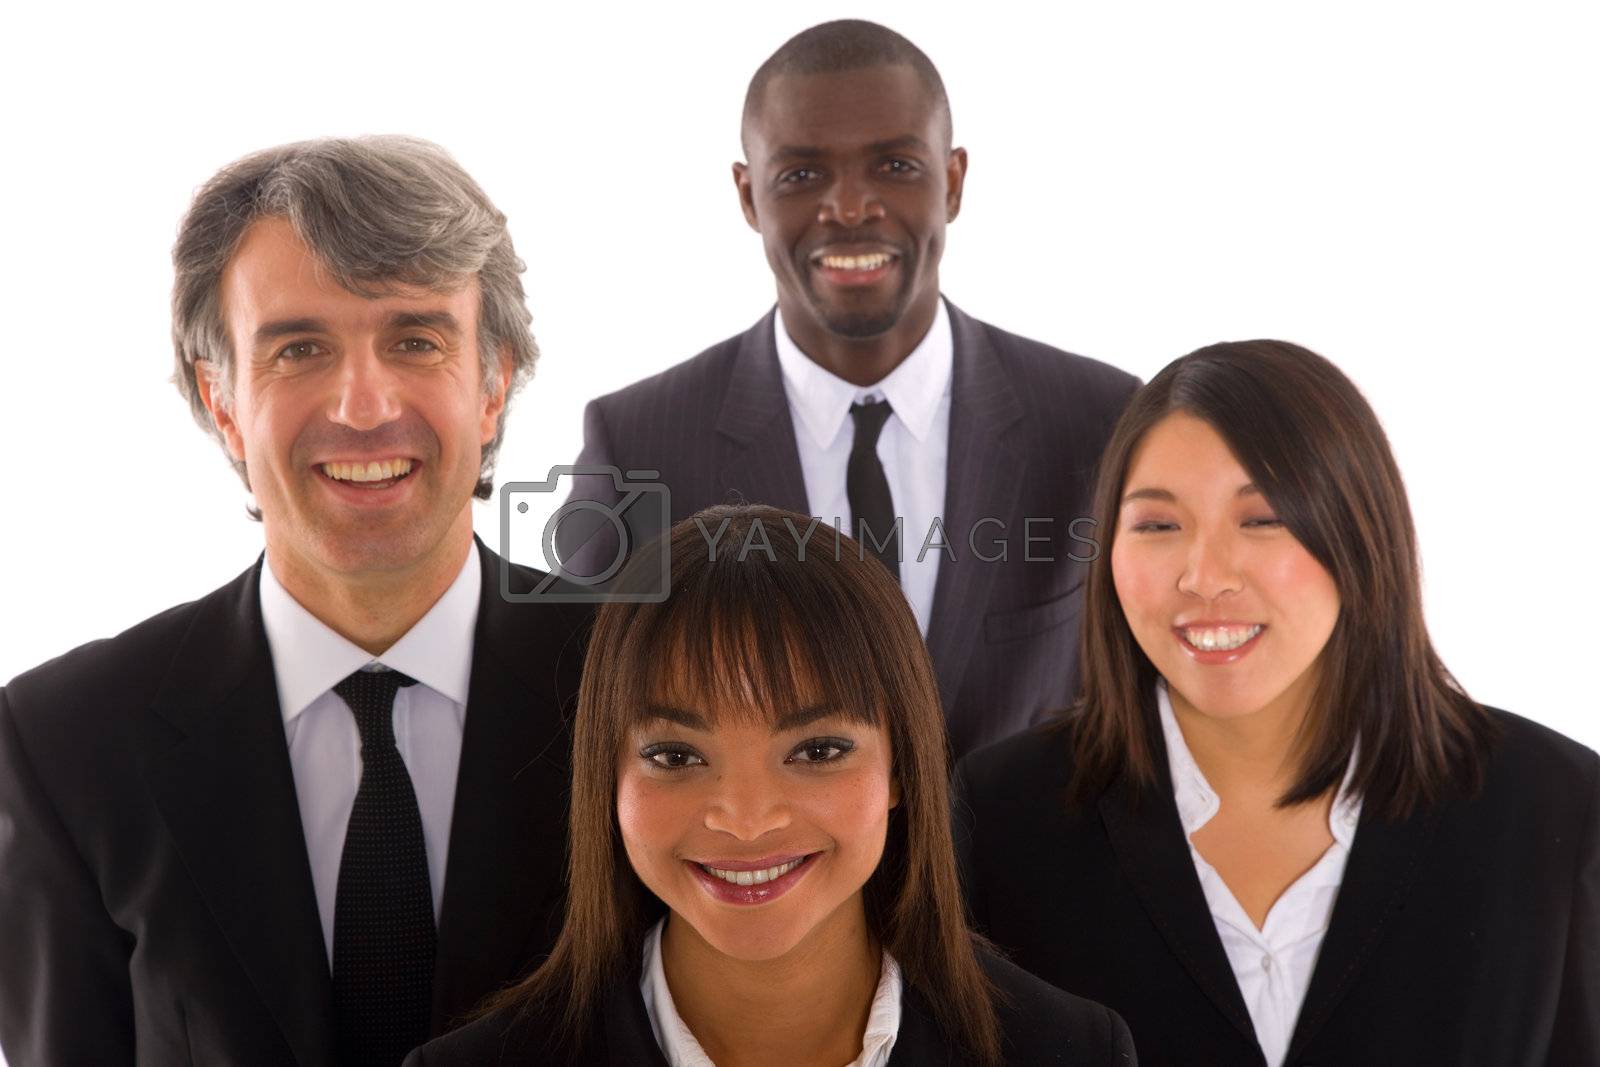 Royalty free image of multi-ethnic team by ambro